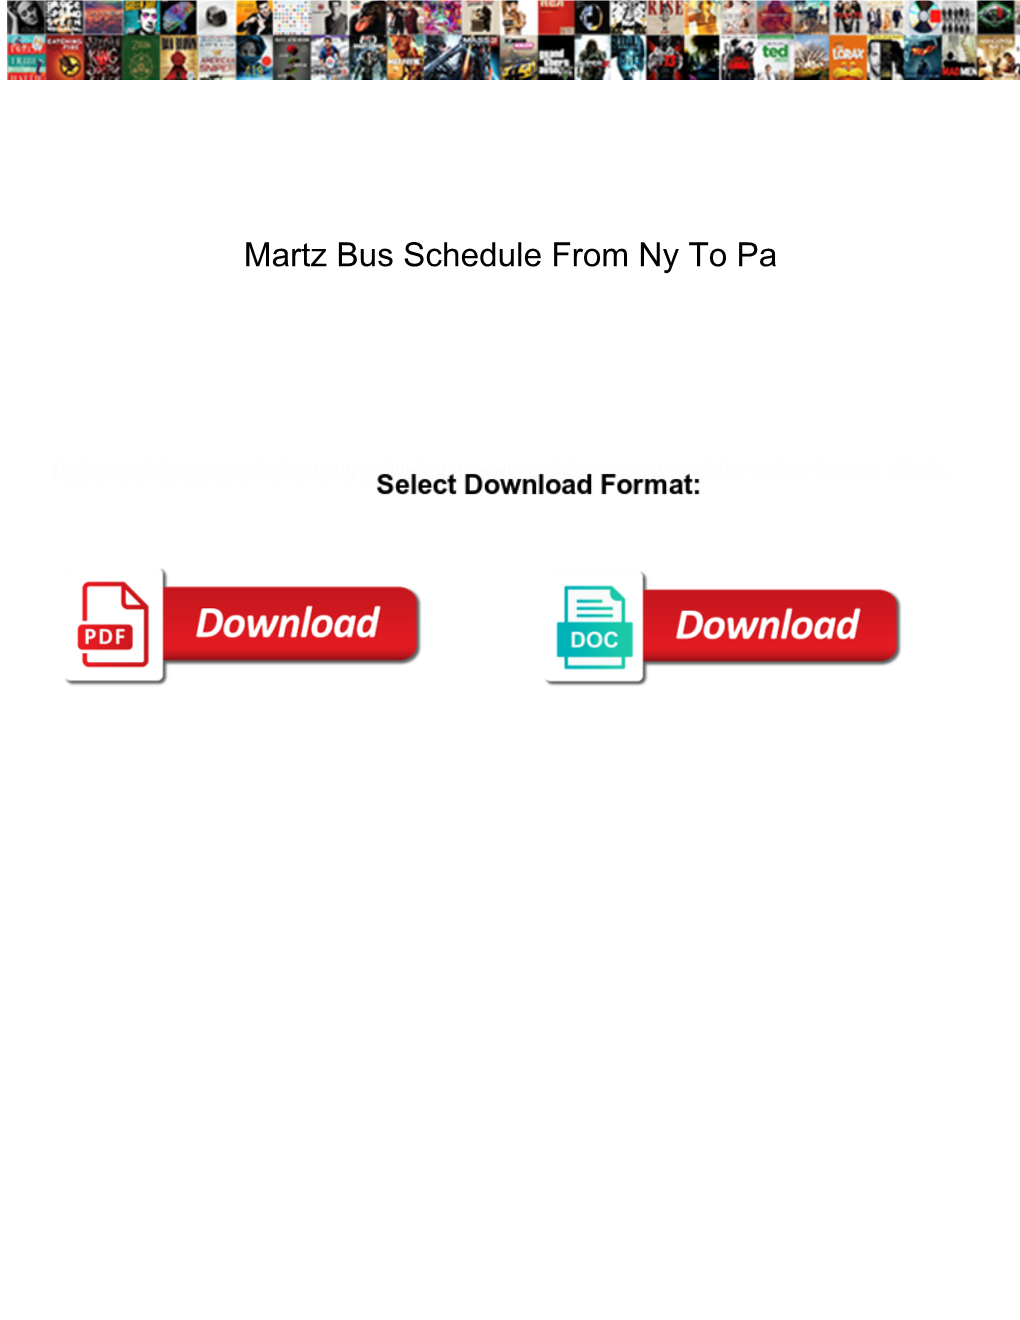 Martz Bus Schedule from Ny to Pa